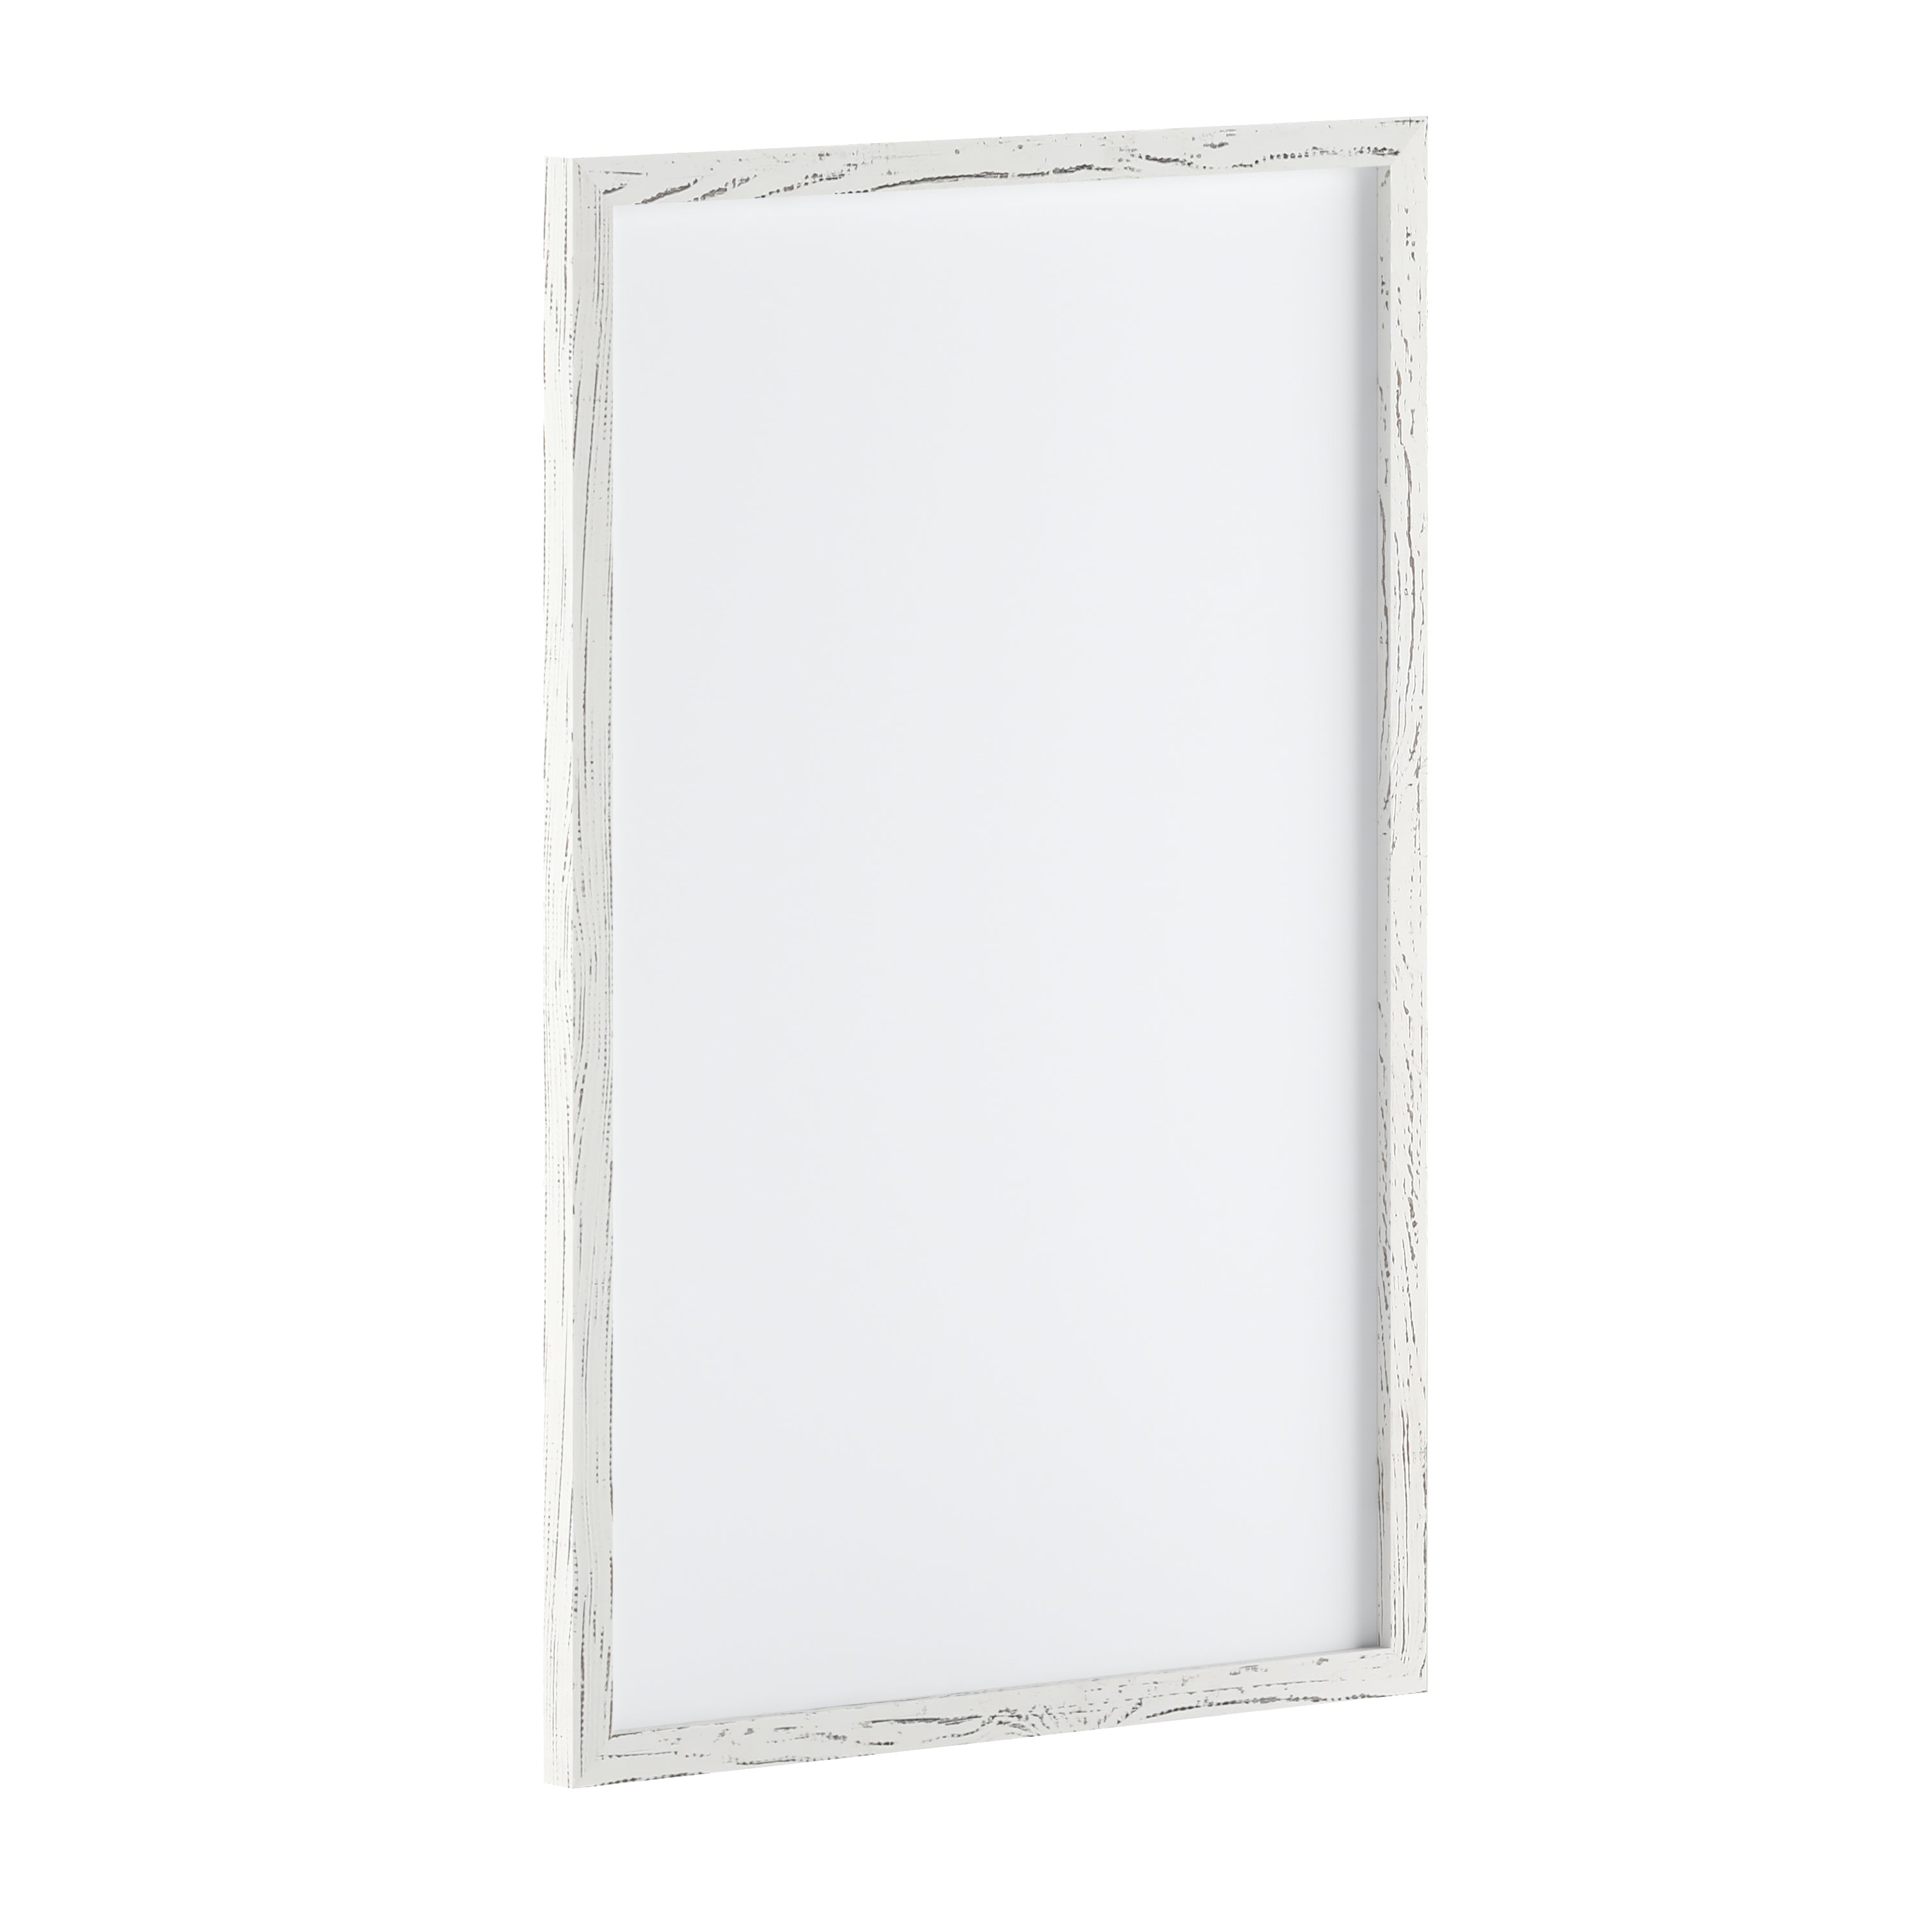 Bristol Wall Mount White Board with Included Dry Erase Marker, 4 Magnets, and Eraser for Home, School or Business-White Boards-Flash Furniture-Wall2Wall Furnishings